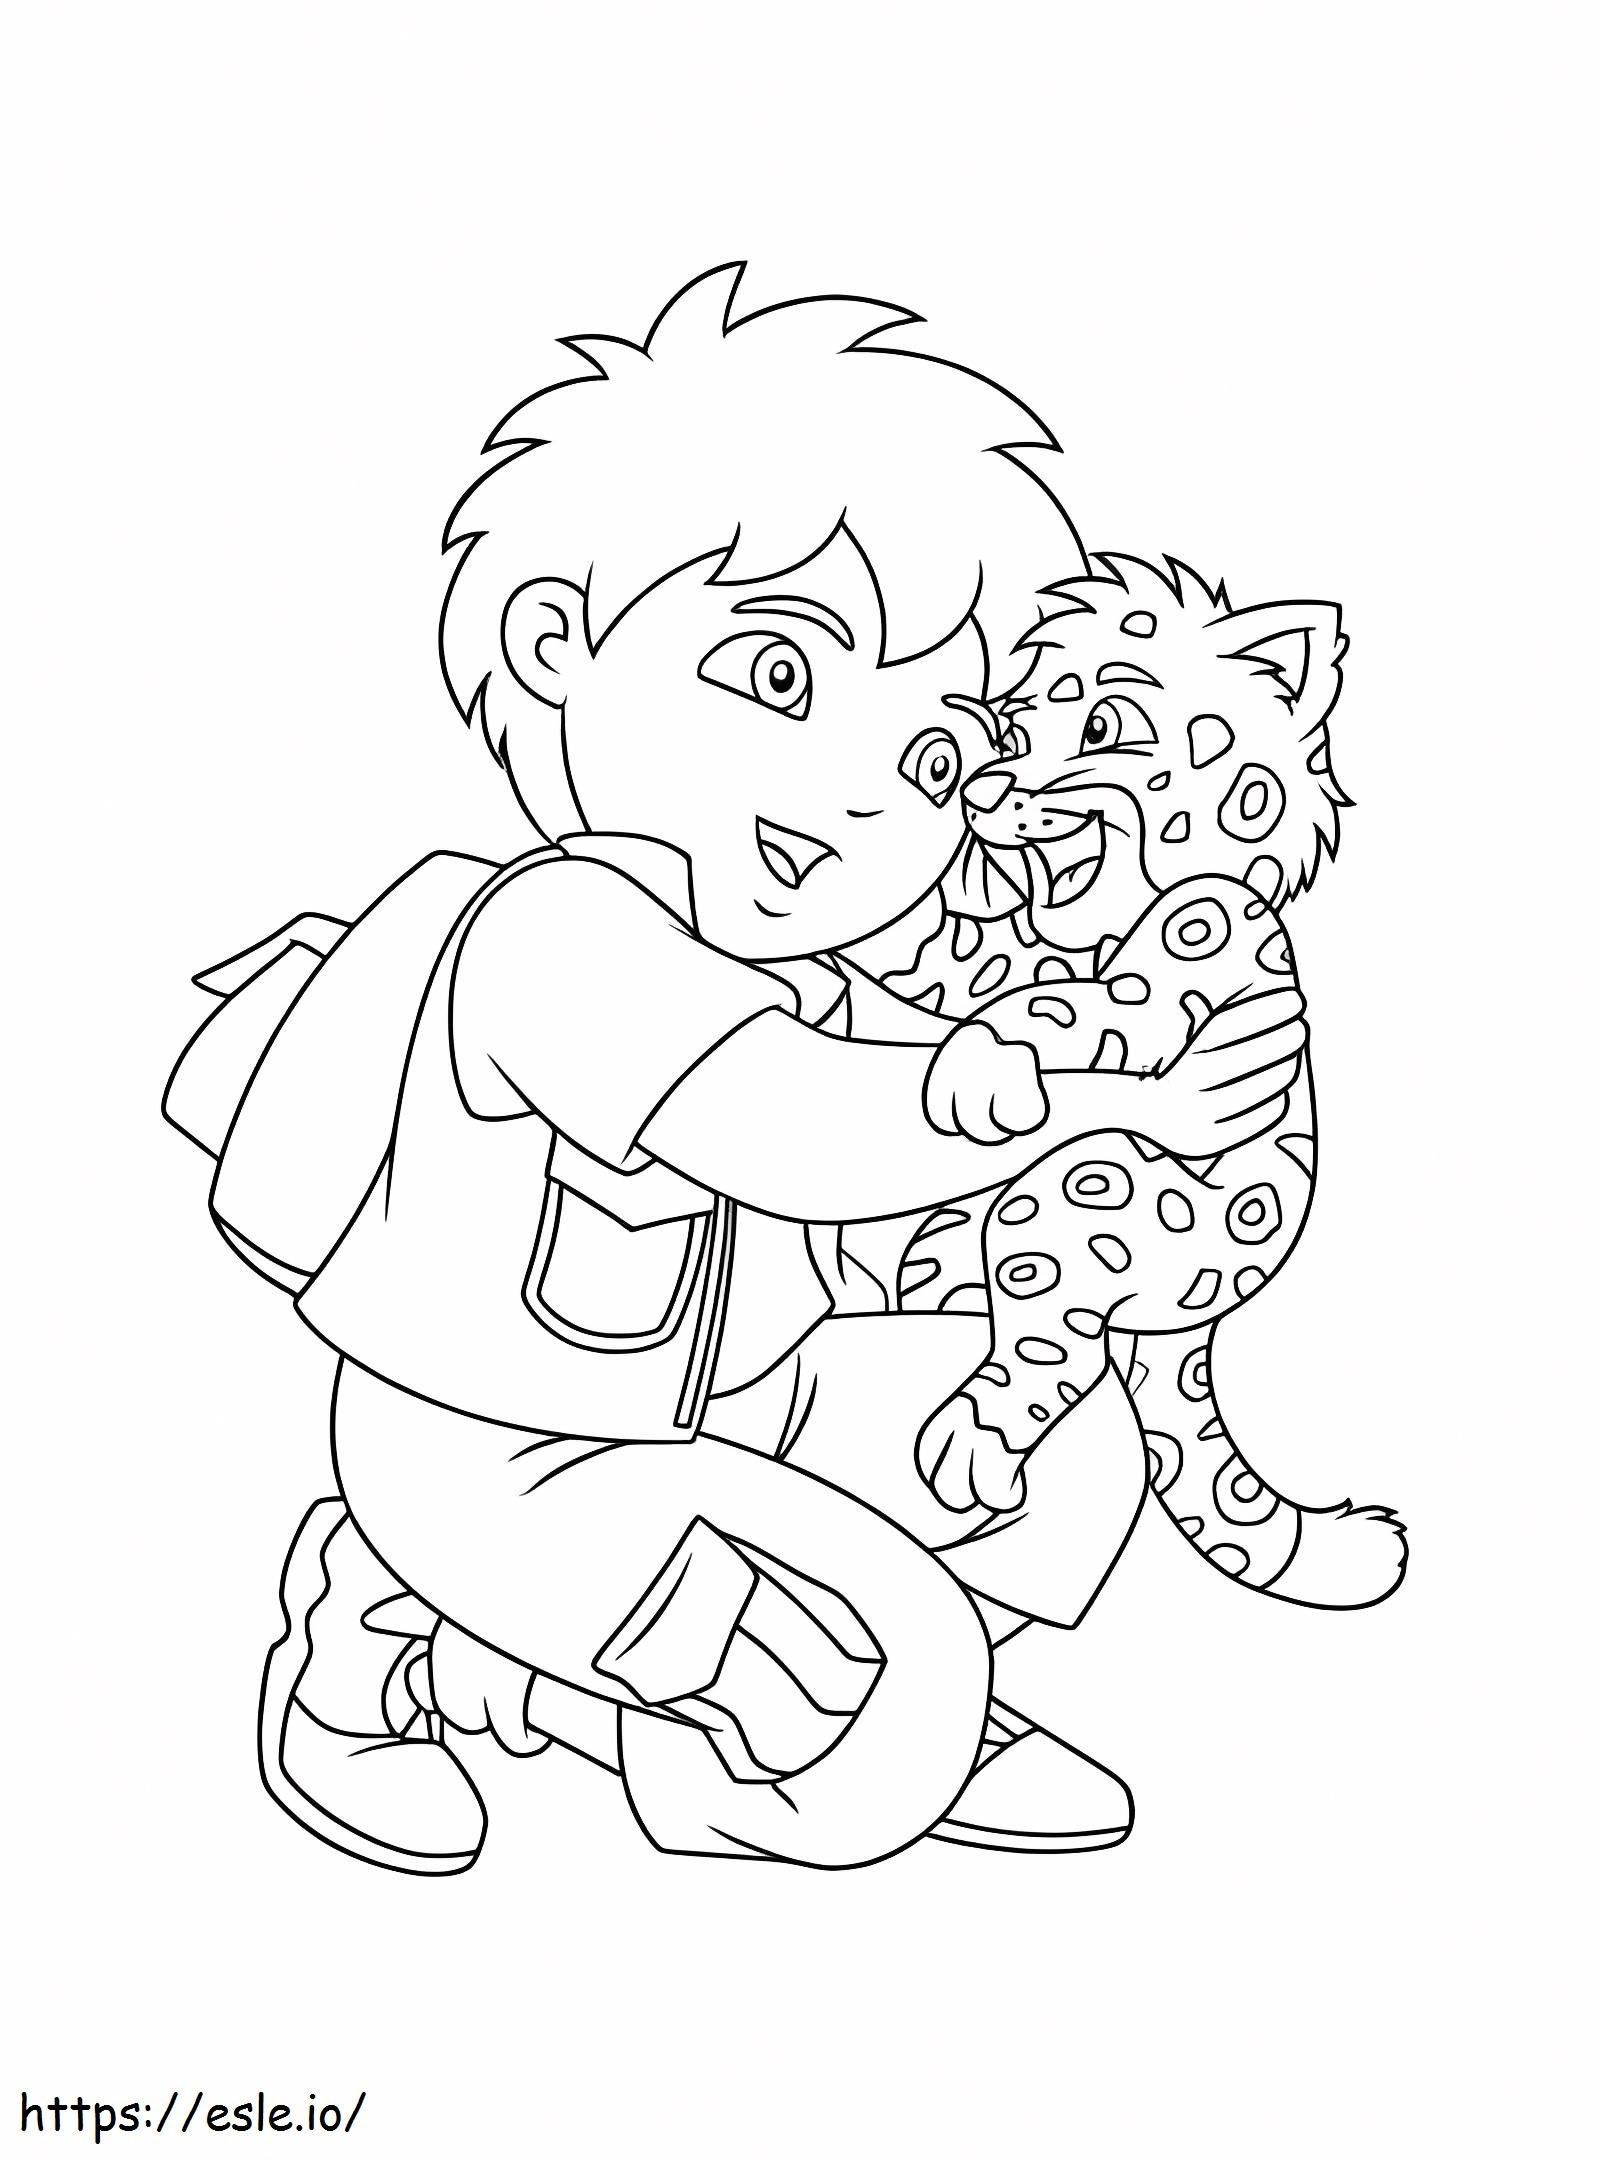 Diego Hugging Diego coloring page